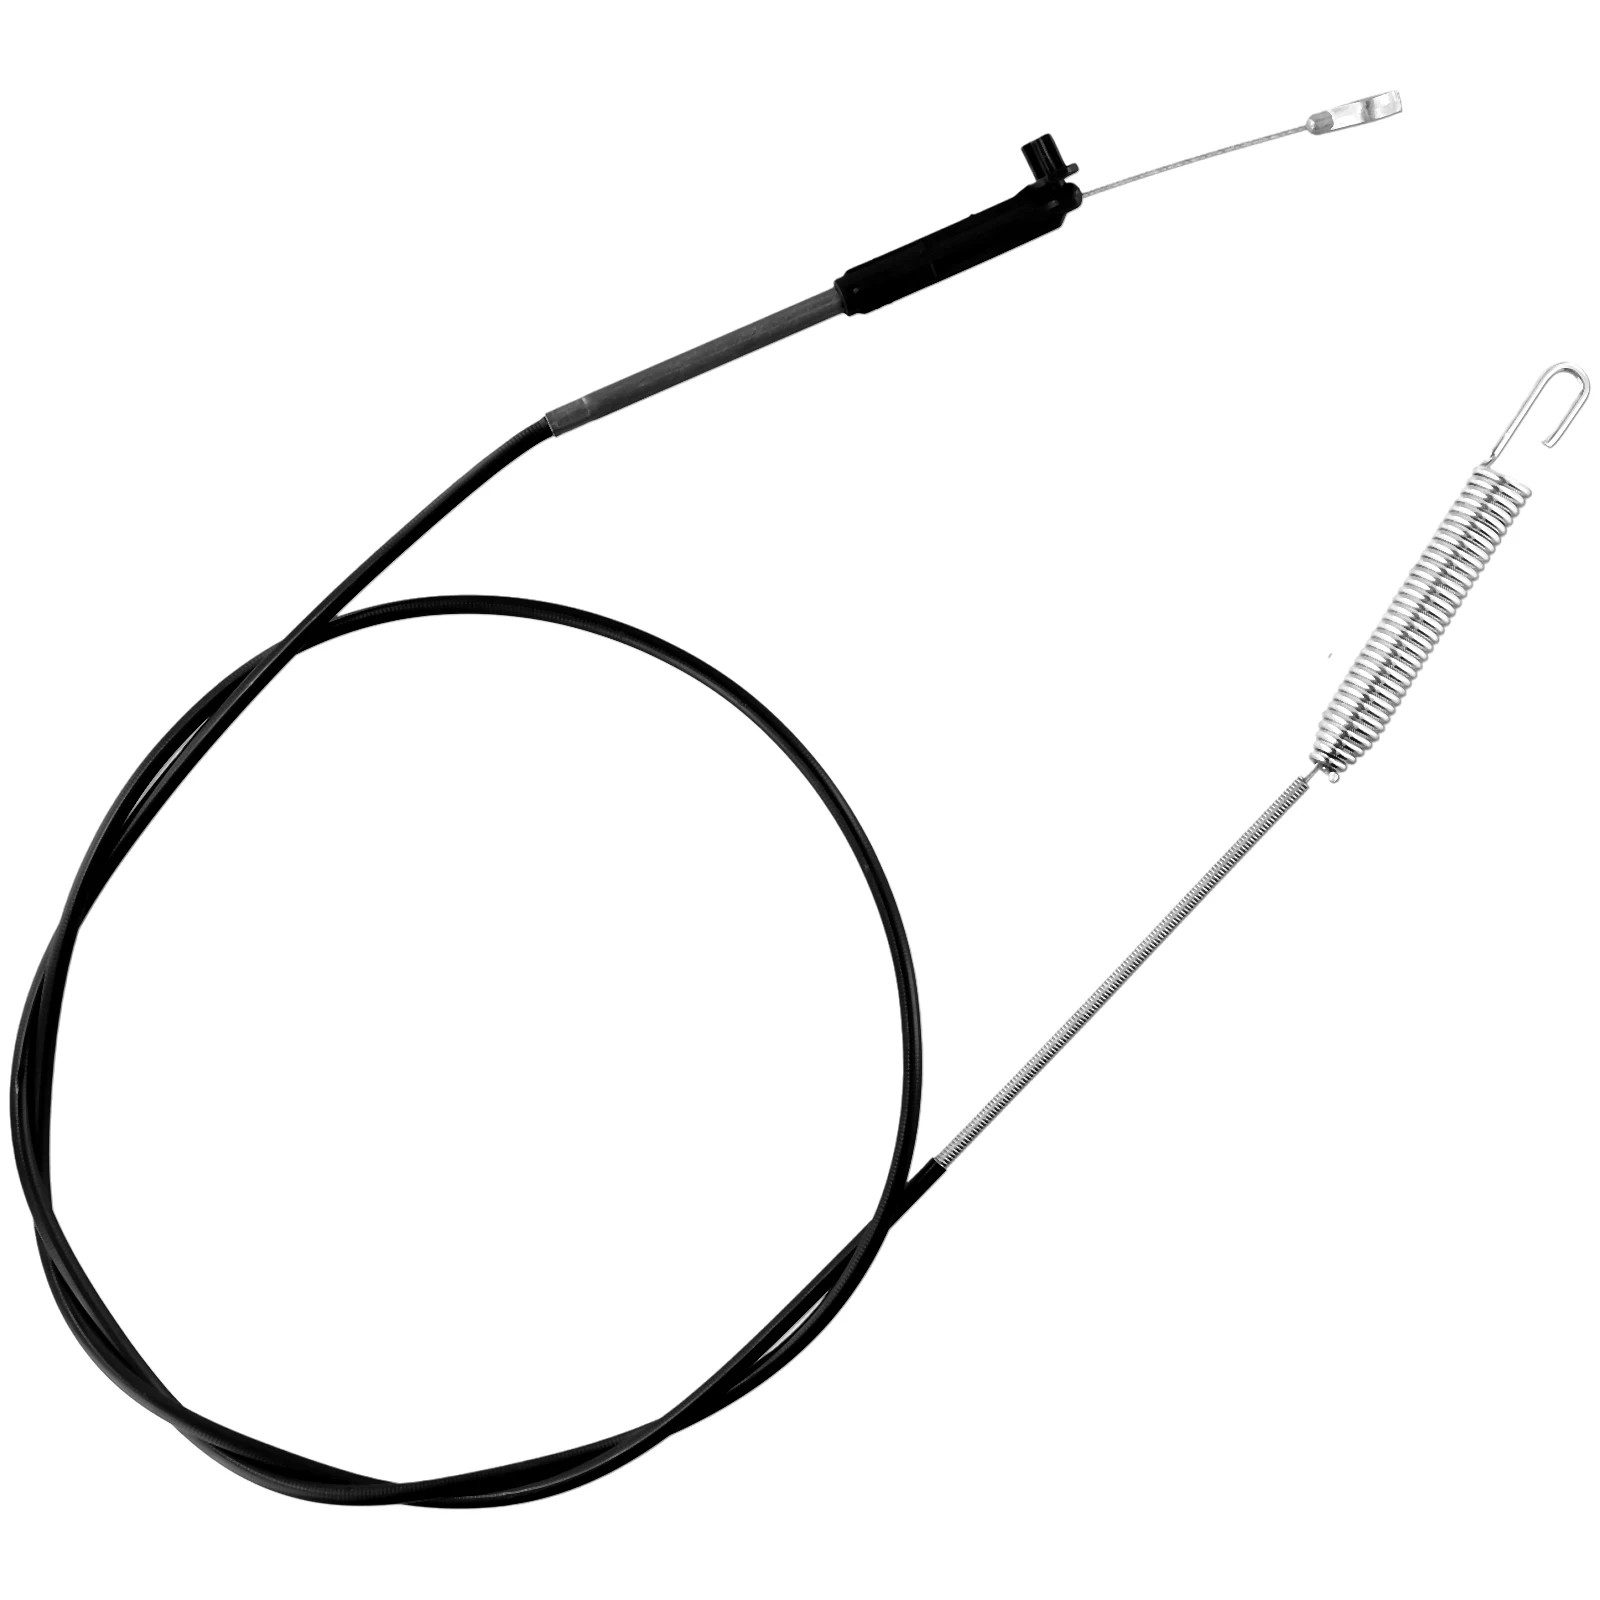 

Lawn Mower Garden Parts Brake Cable For Toro 120-6243 Time Master 30" 1206243 Timemaster 20199 20200 20975 20977